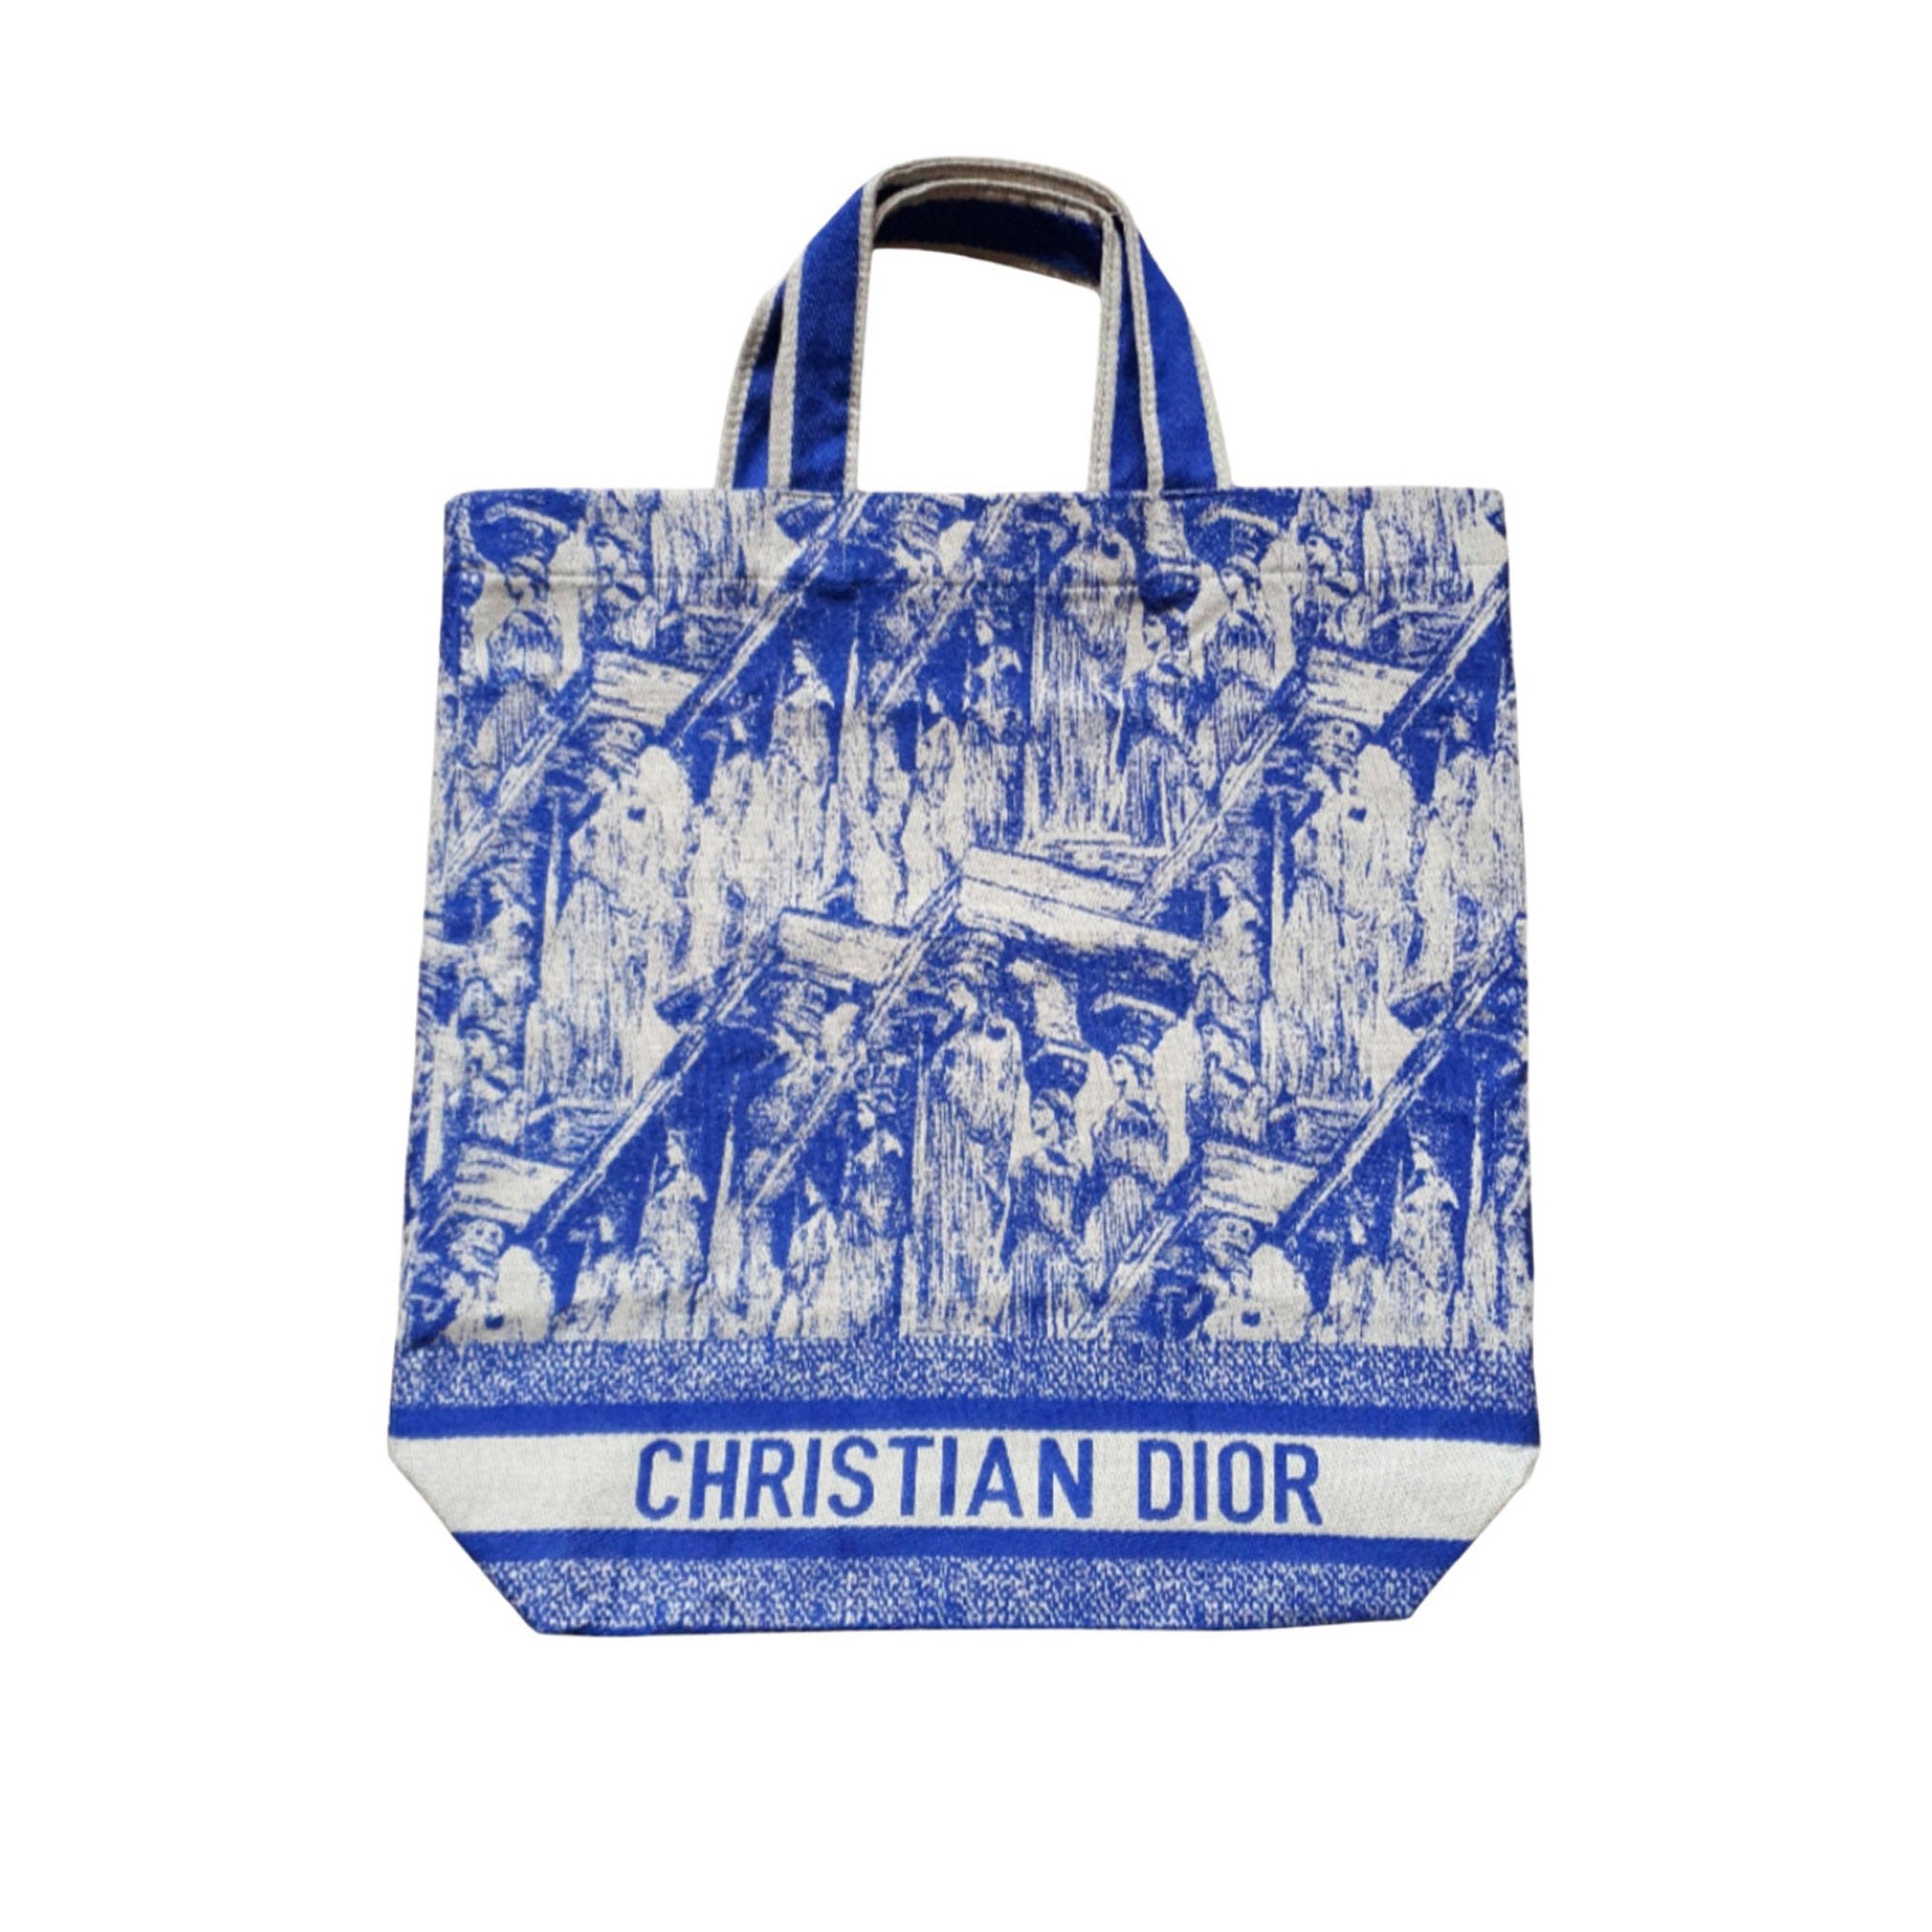 Dior - Authenticated Book Tote Handbag - Cotton Blue for Women, Very Good Condition